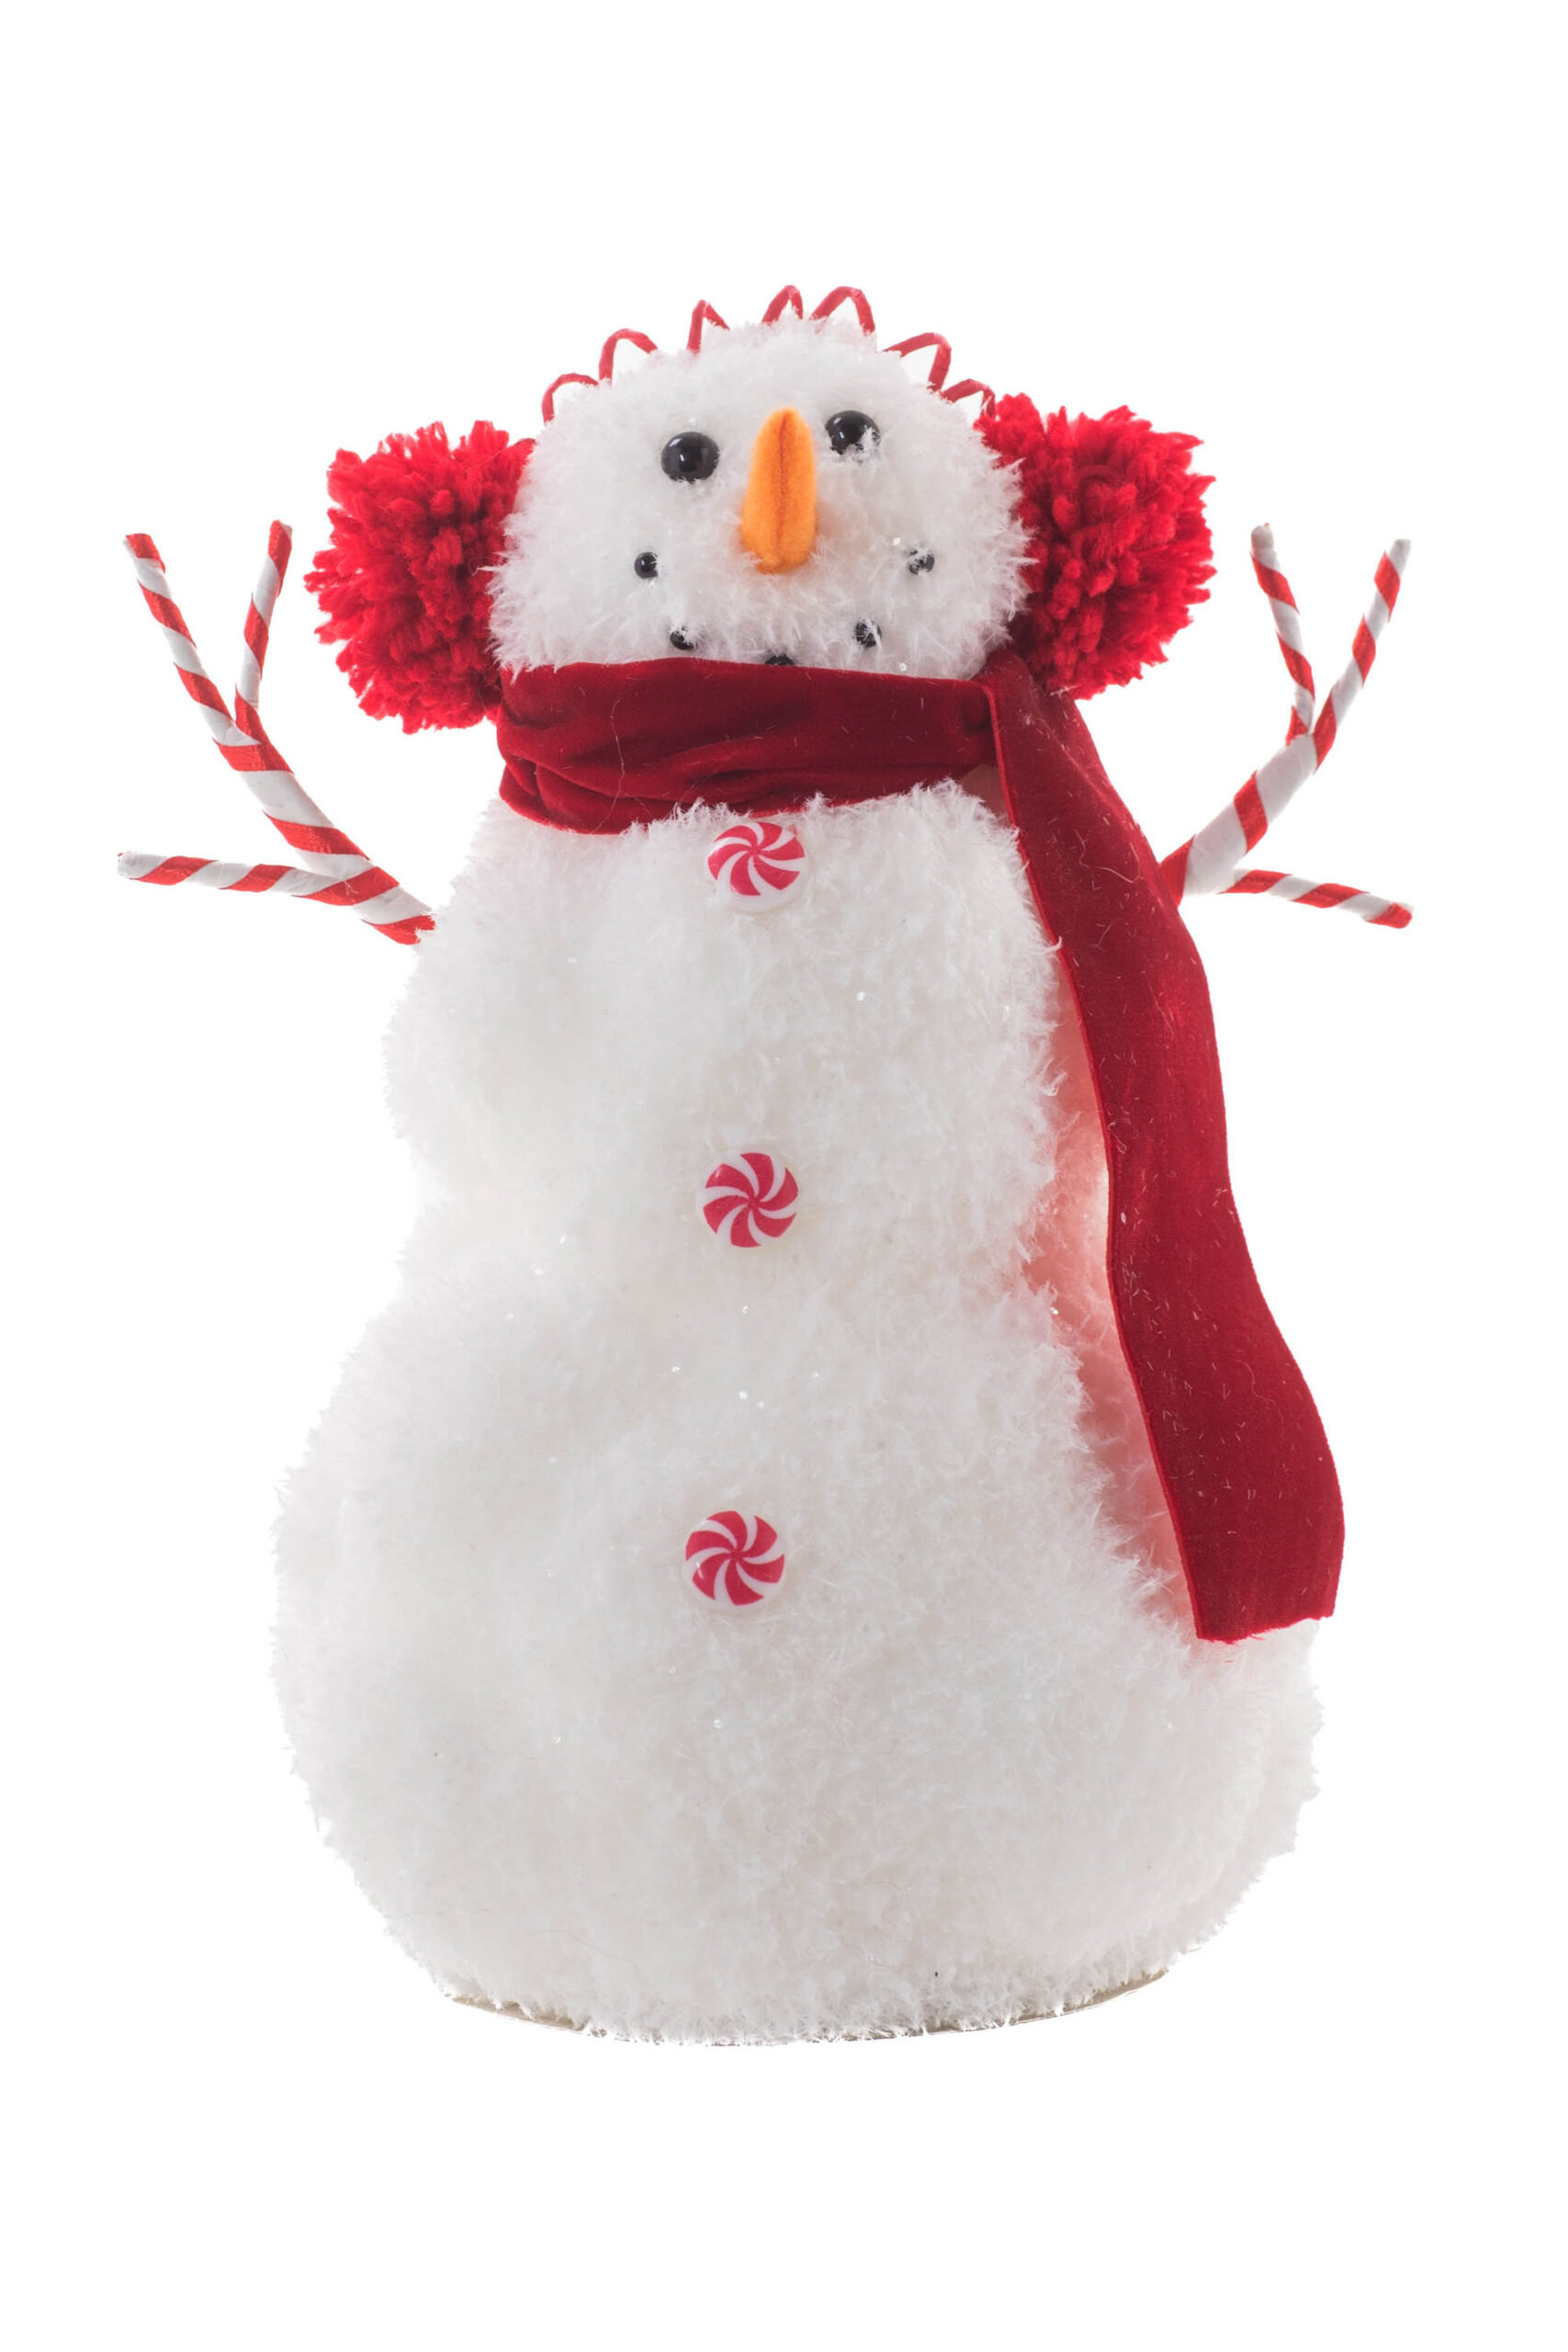 Soft White Fur Snowman with Red Ear Muffs